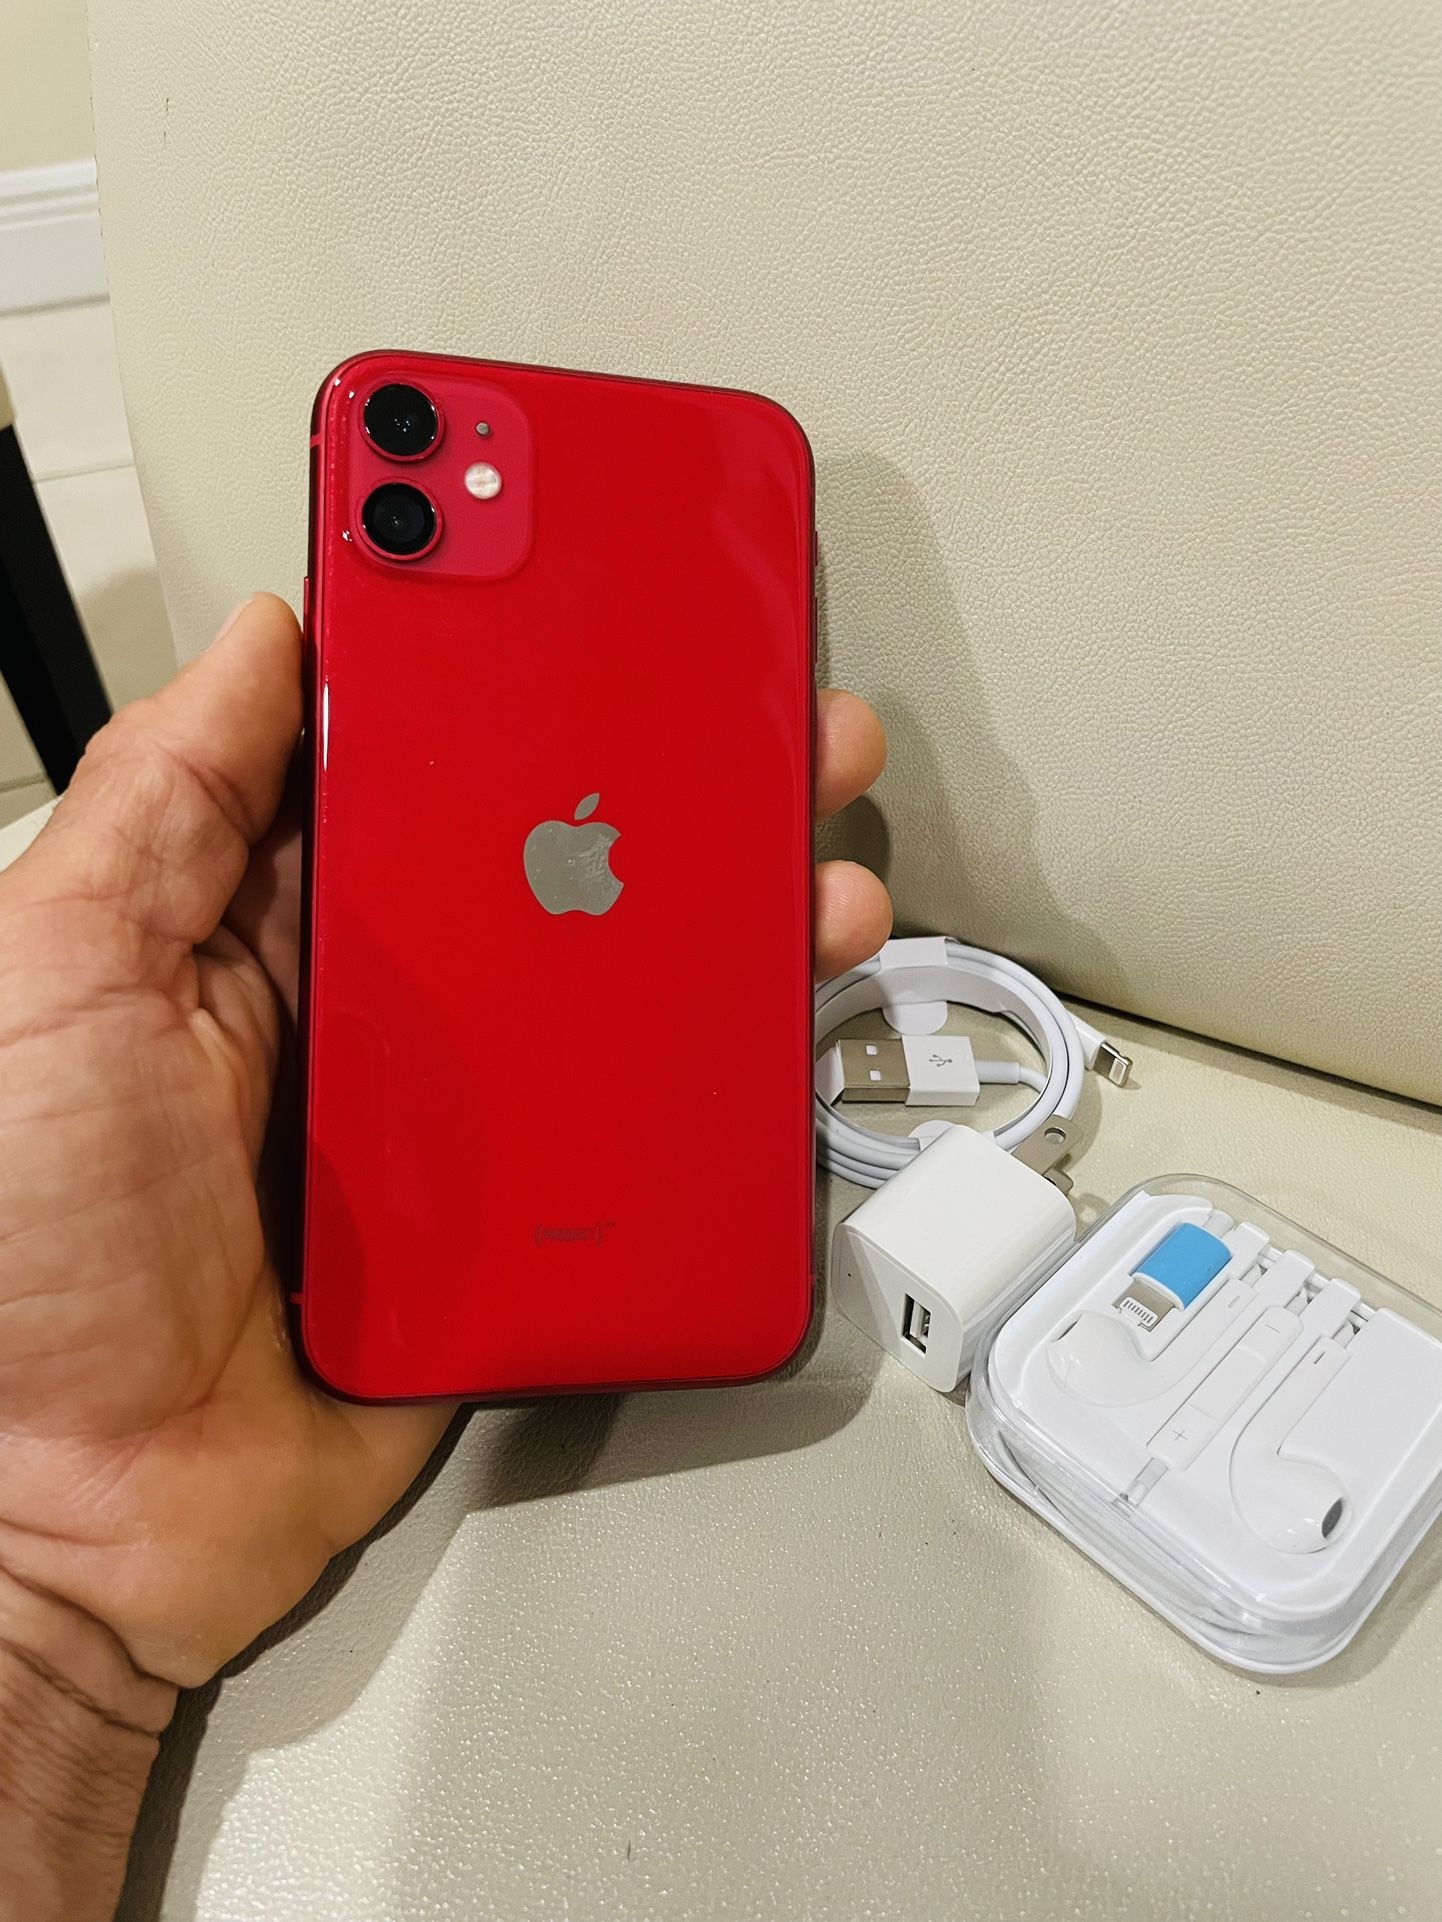 iPhone 11 Red 64gb Unlocked. Firm Price